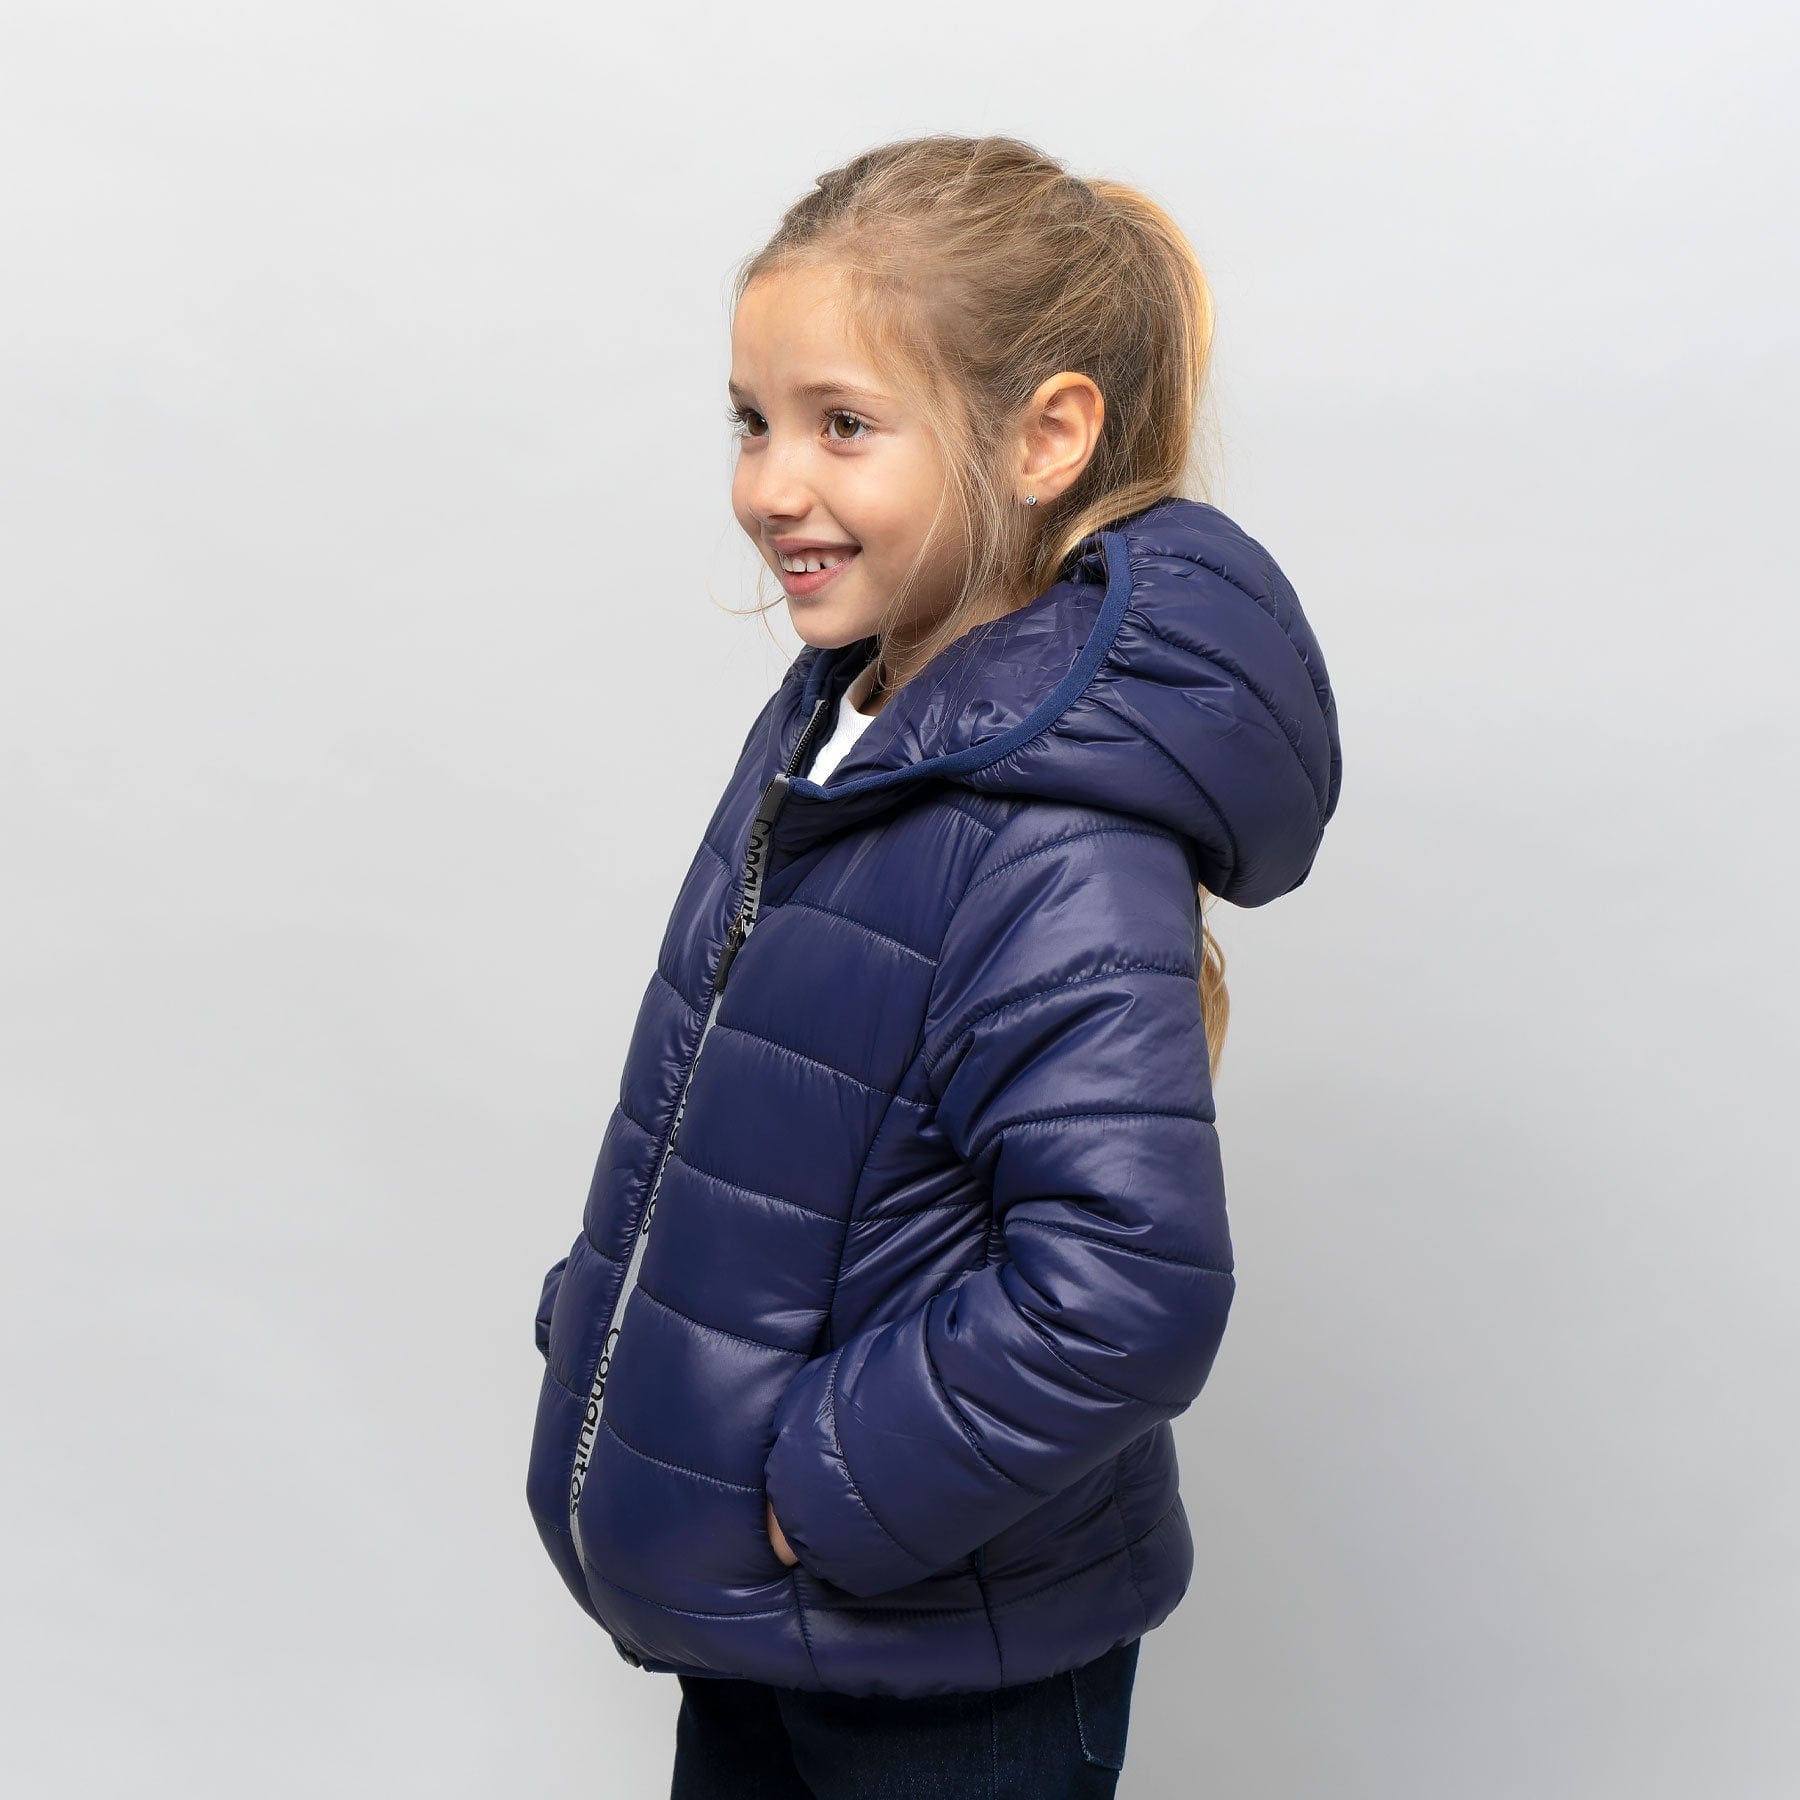 CONGUITOS TEXTIL Clothing Girl's Navy Recycled Reflectant Anorak